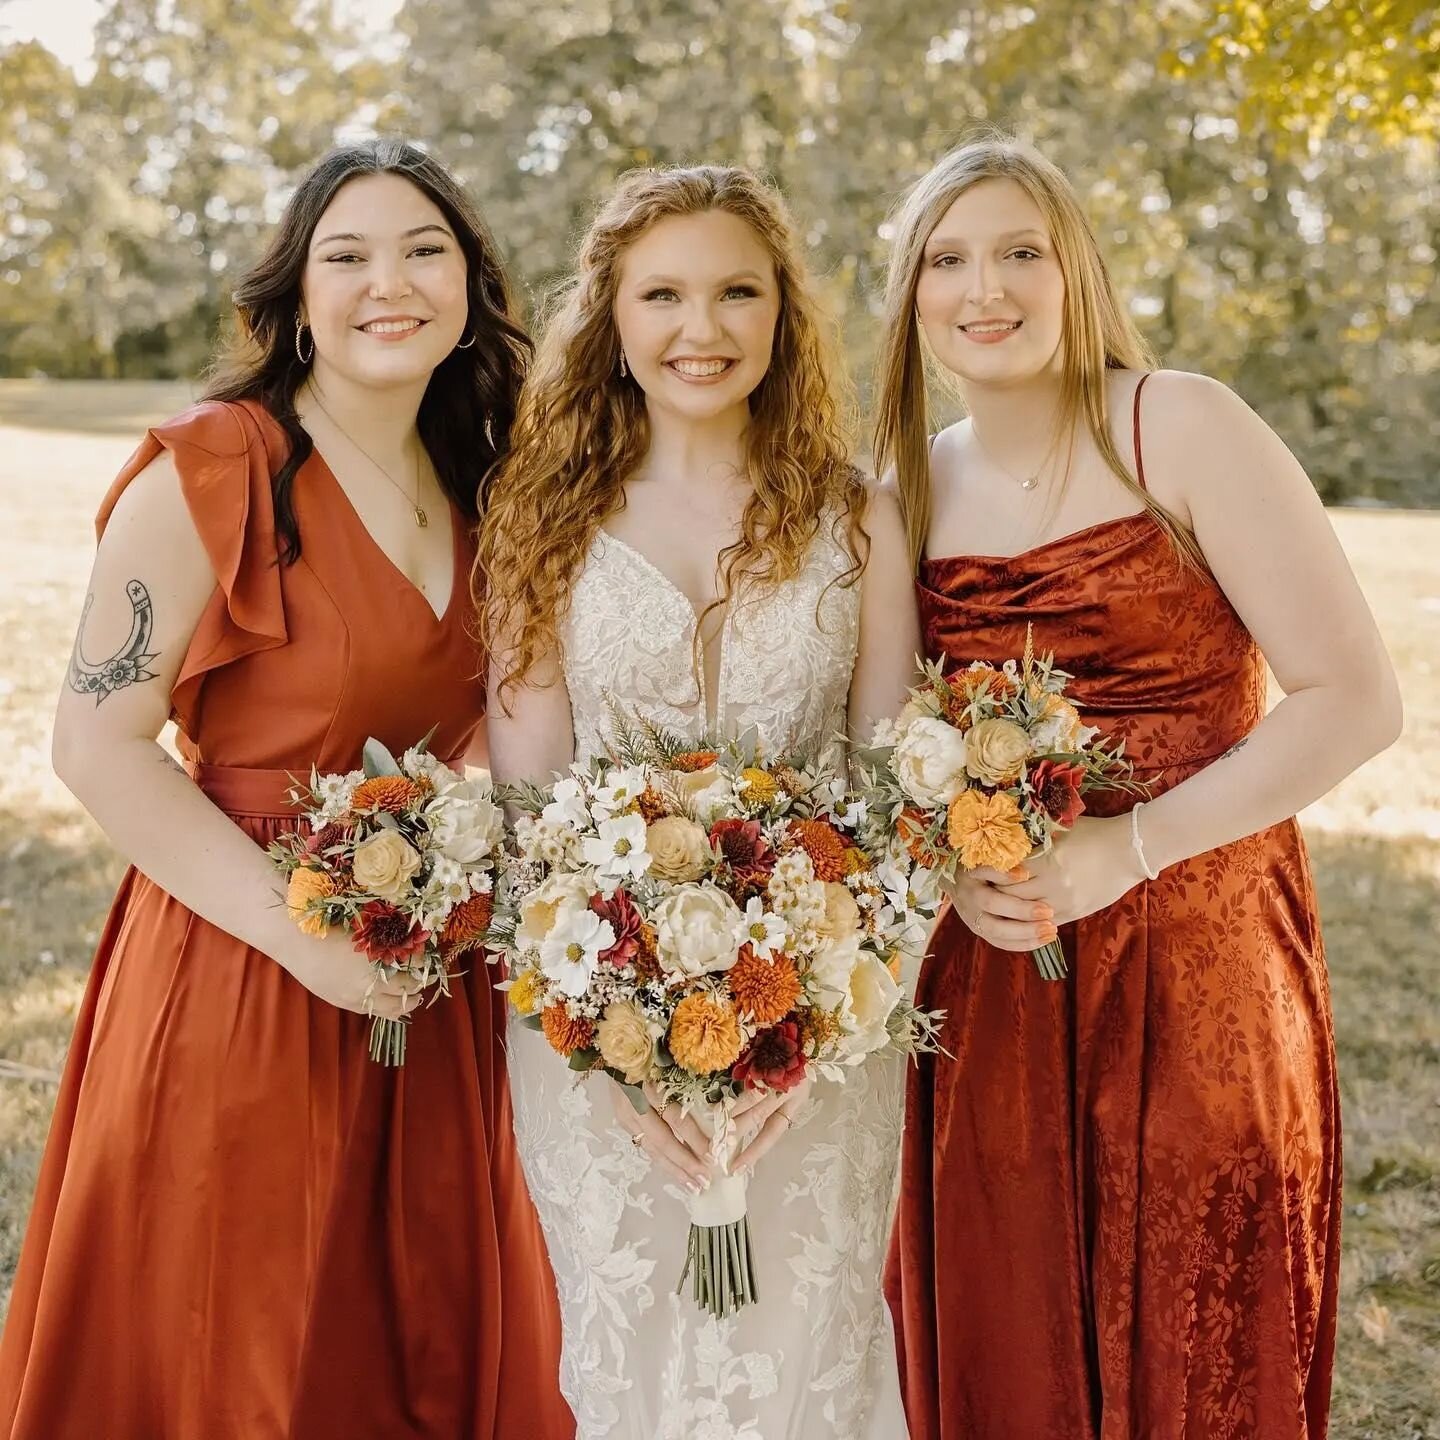 We are embracing the beauty of fall on the last day of the season with this gorgeous wedding! We just love the pairing of wild flowers, peach, and burnt orange! 

Today, our beautiful bride and her bouquet take the center stage as we bid farewell to 